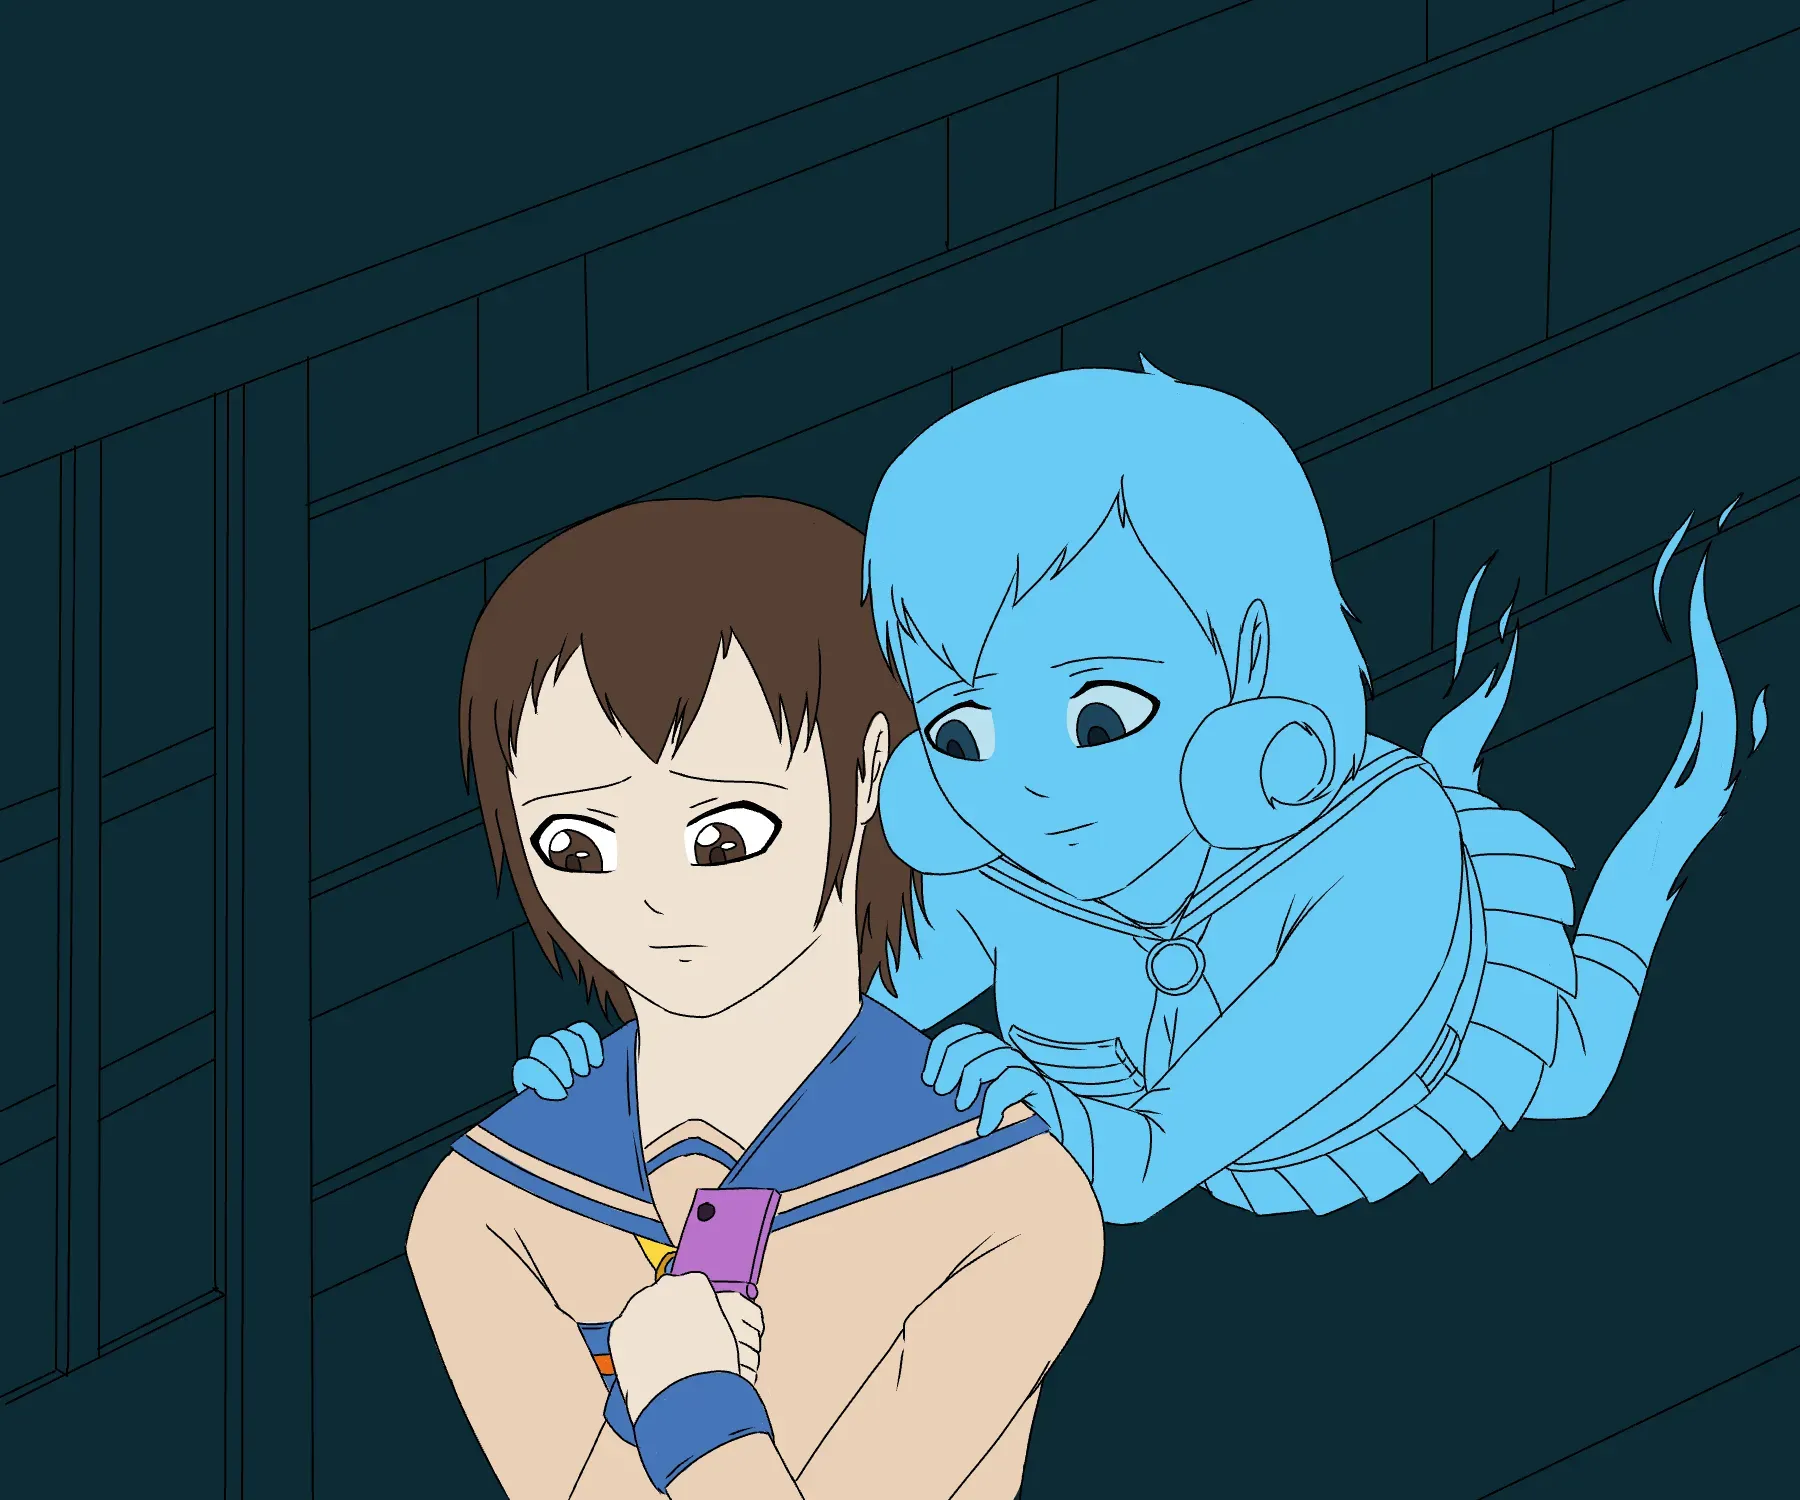 Fan art of Naomi and Seiko from Corpse Party